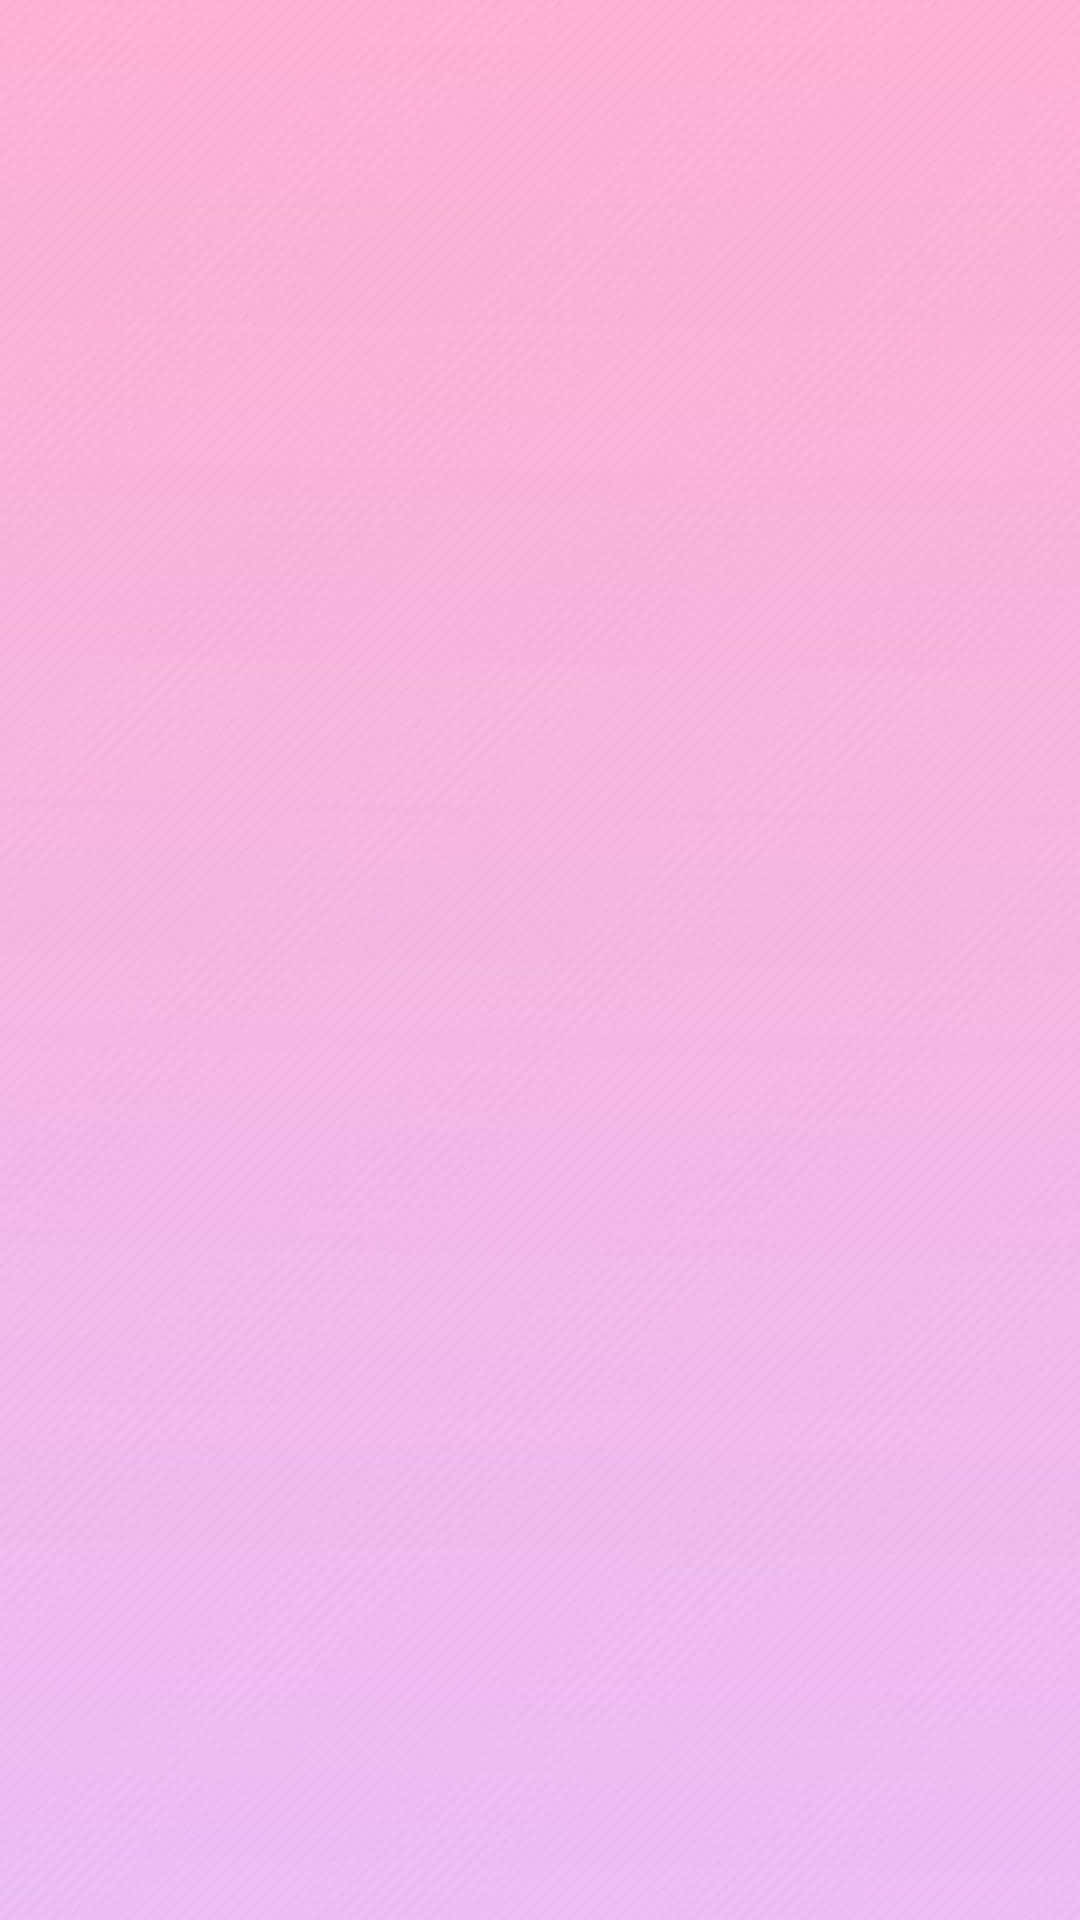 Bright and Cool Pink Background